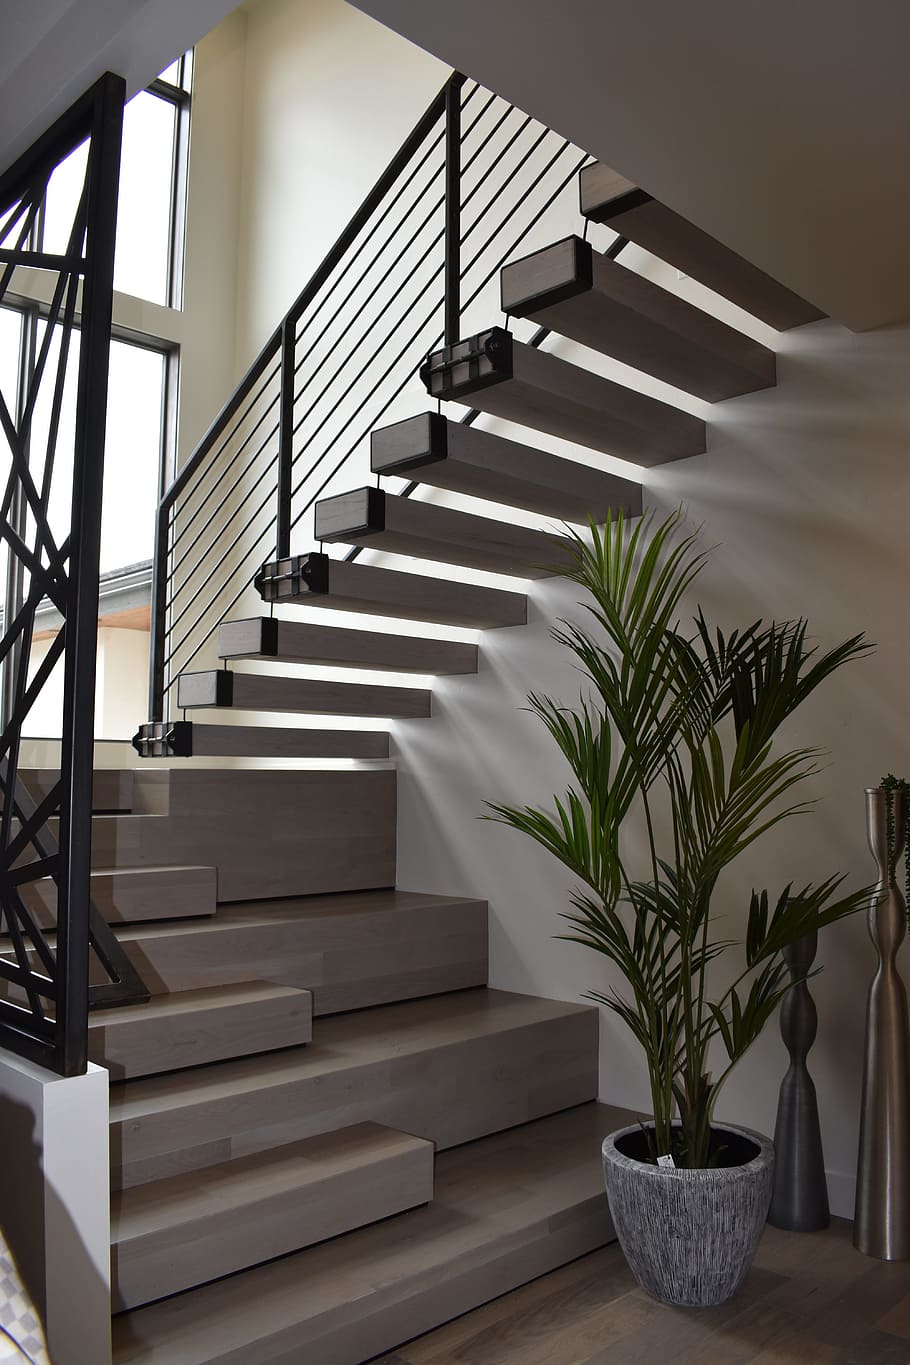 Structure and Railings of Modern Staircases